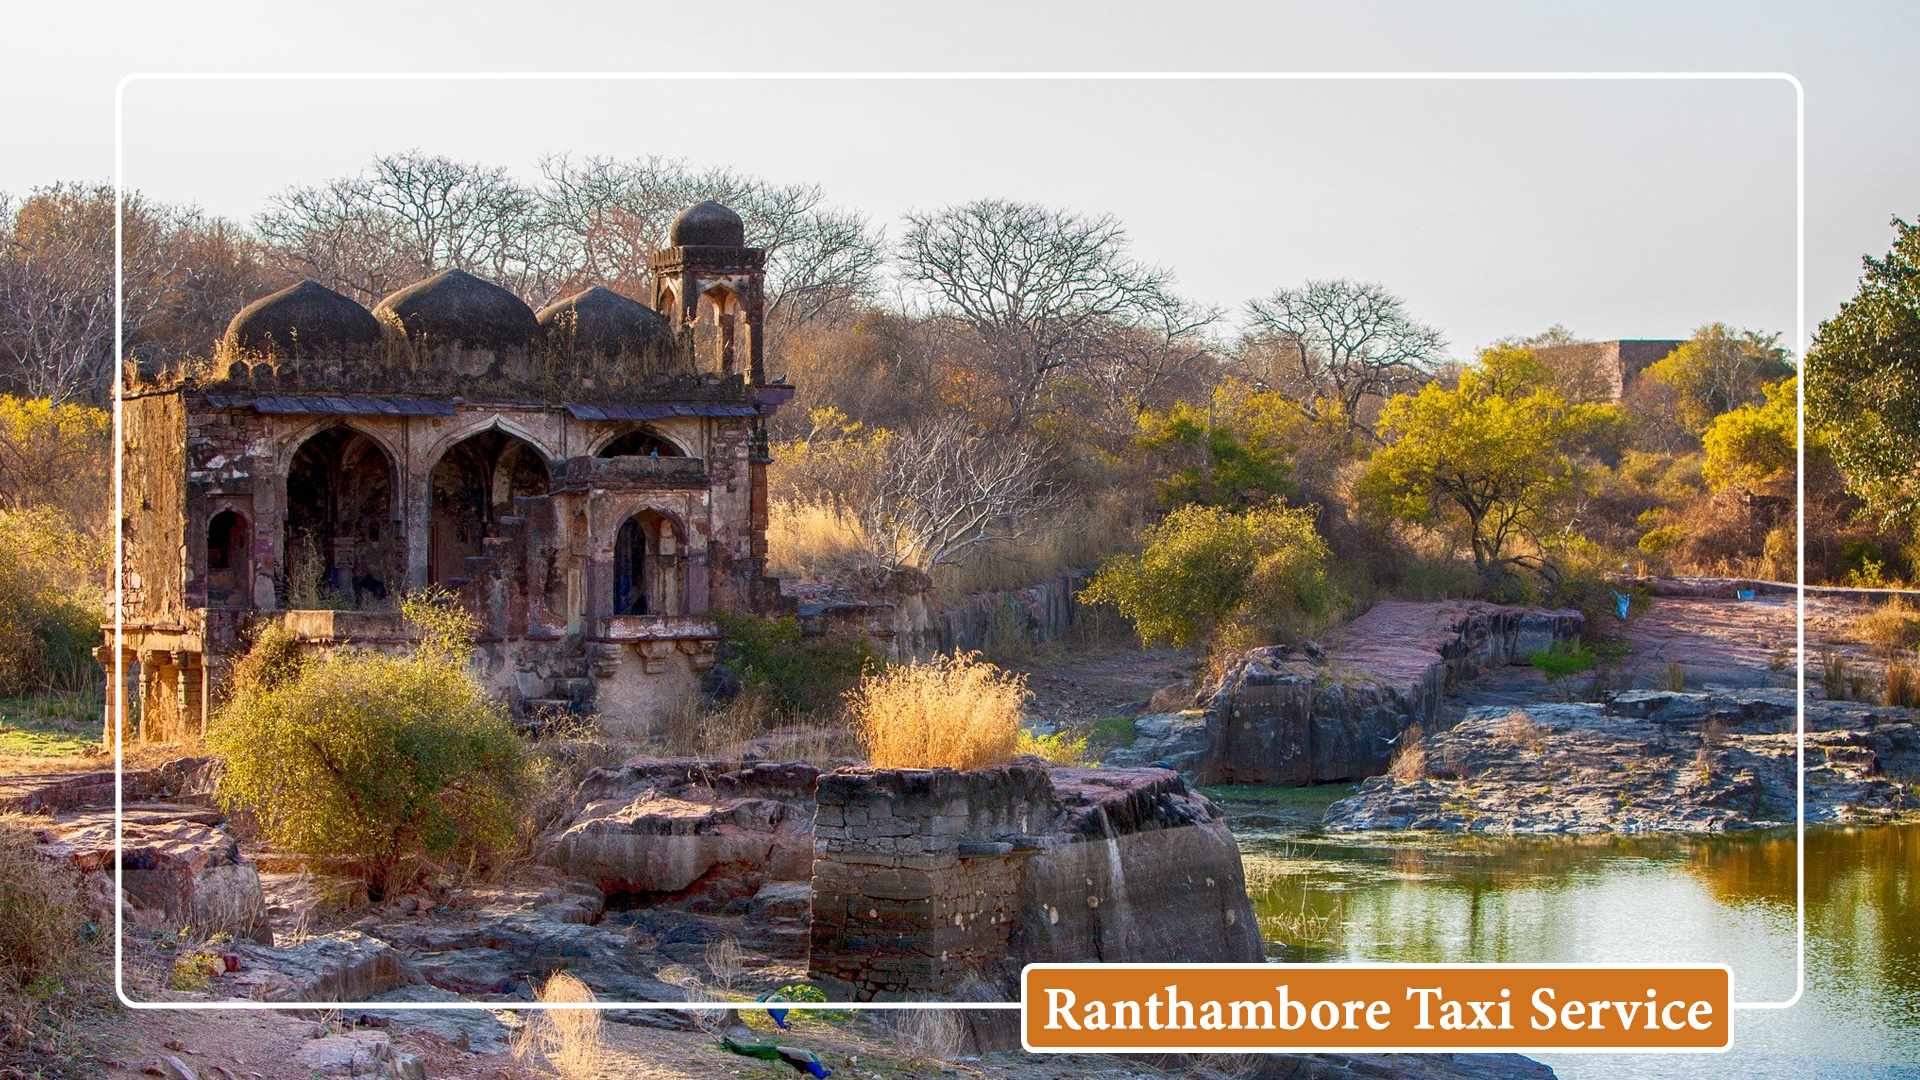 This image depicts the Jaipur to Ranthambore taxi service with a beautiful view of Ranthambore.